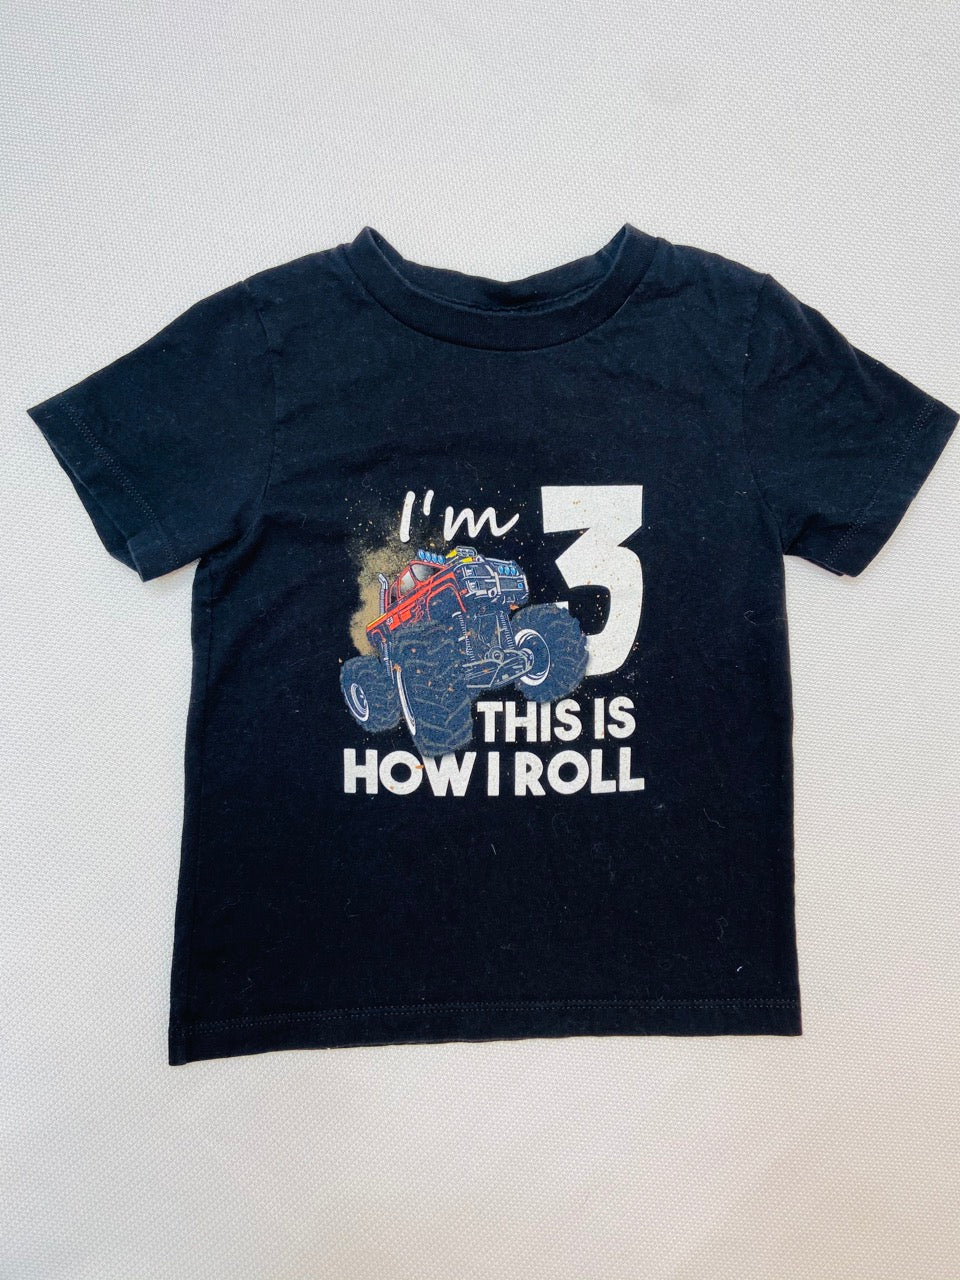 "I'm 3 This Is How I Roll" Birthday Shirt - 3T